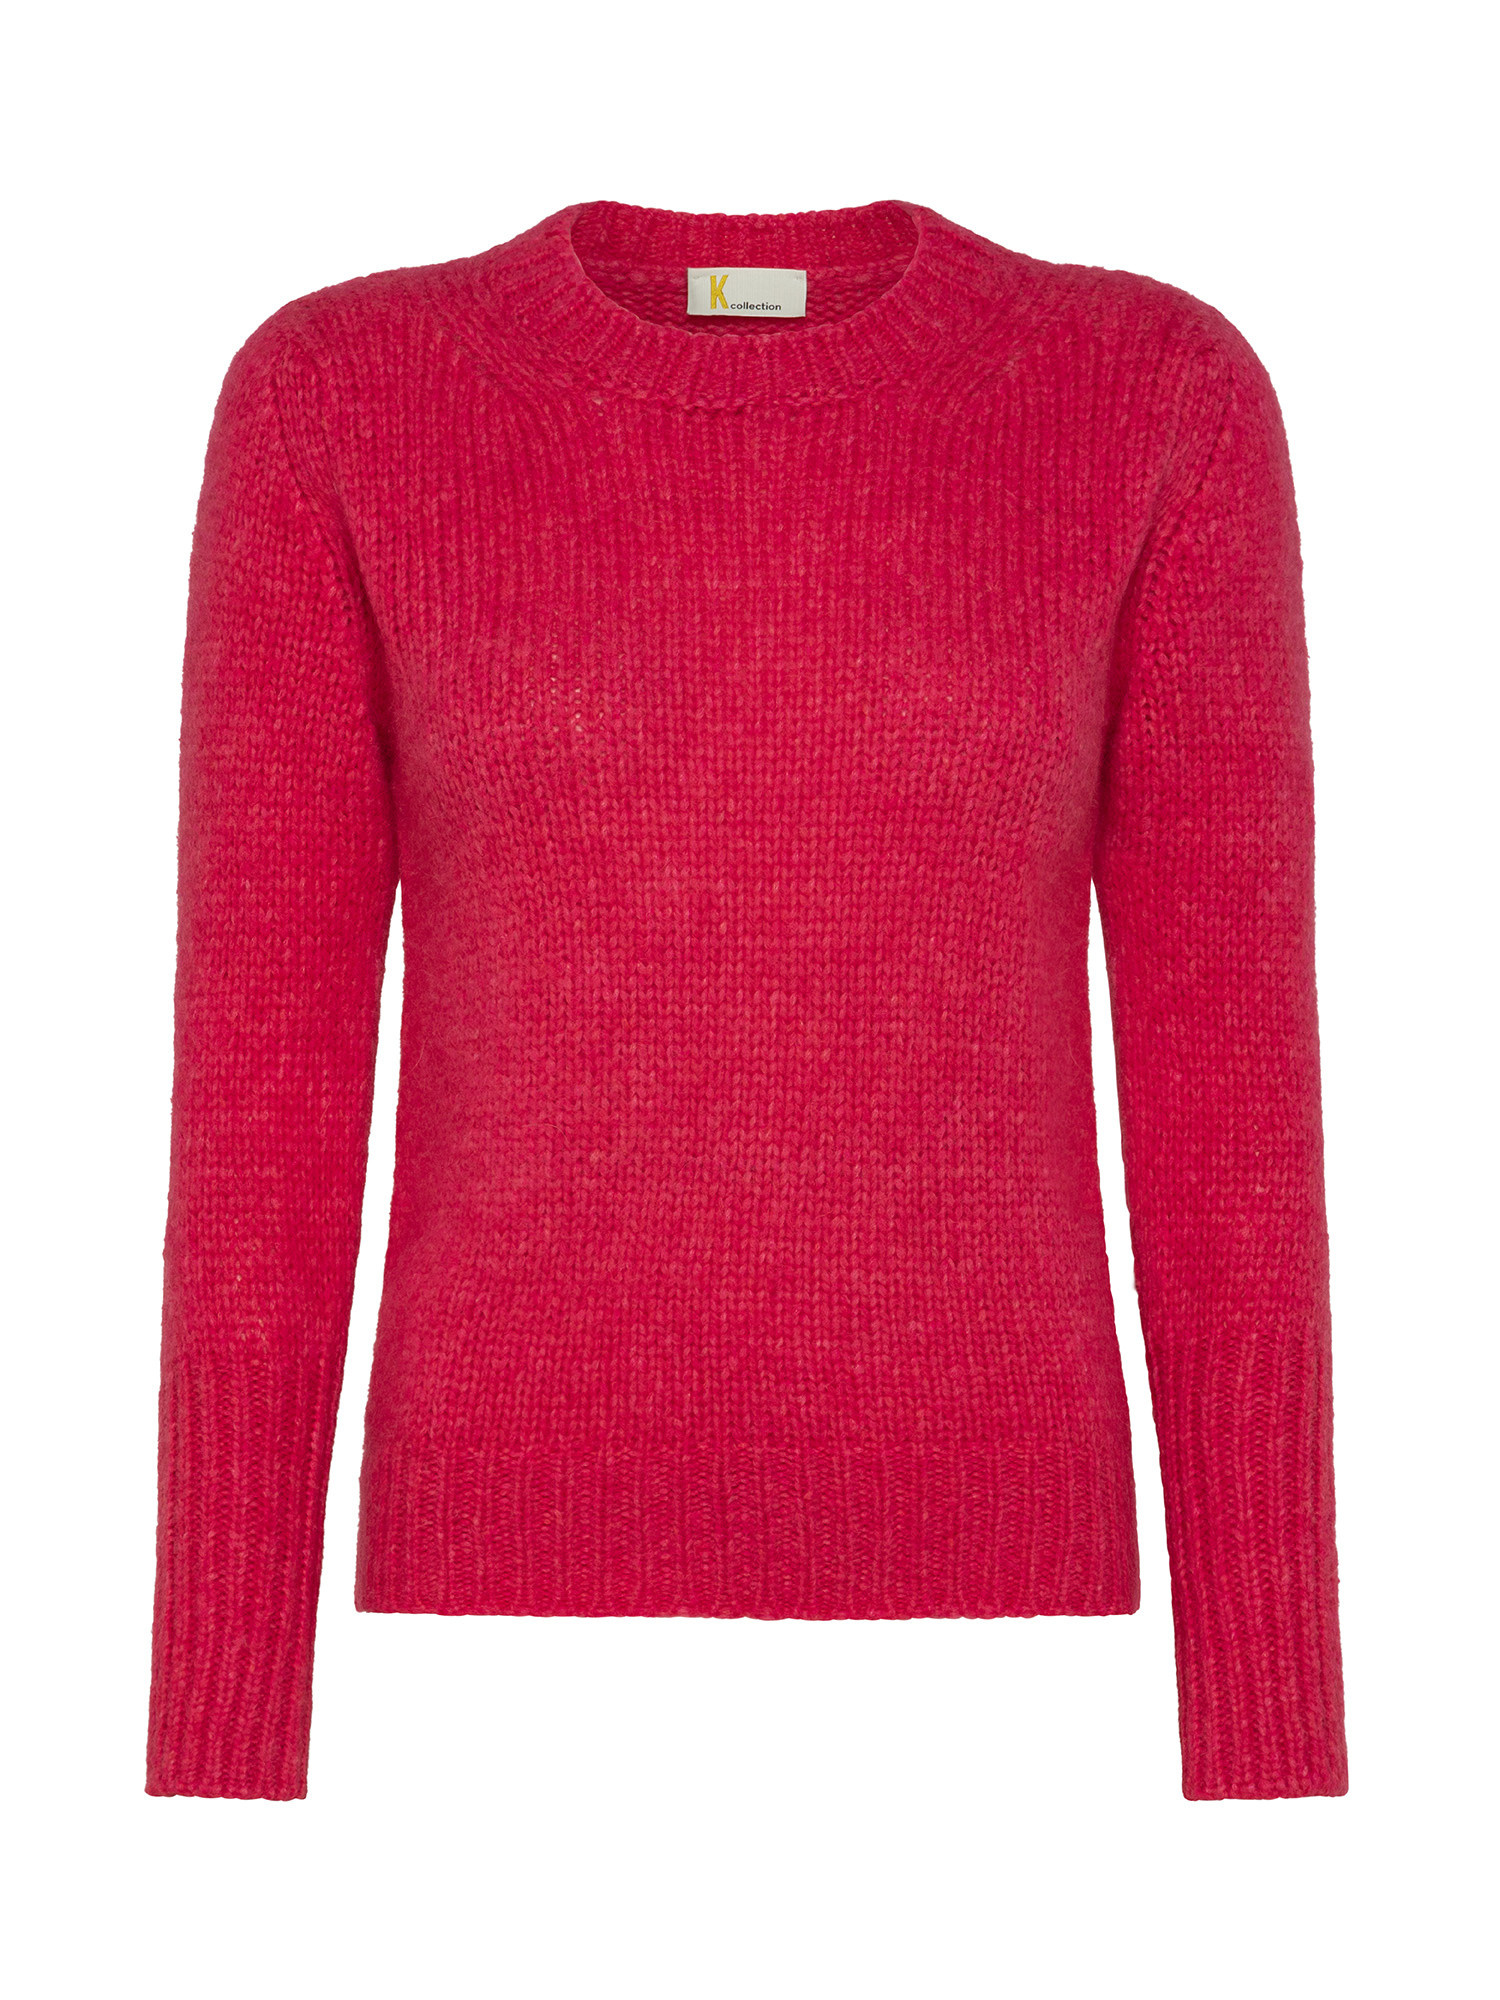 K Collection - Crewneck sweater, Pink Fuchsia, large image number 0